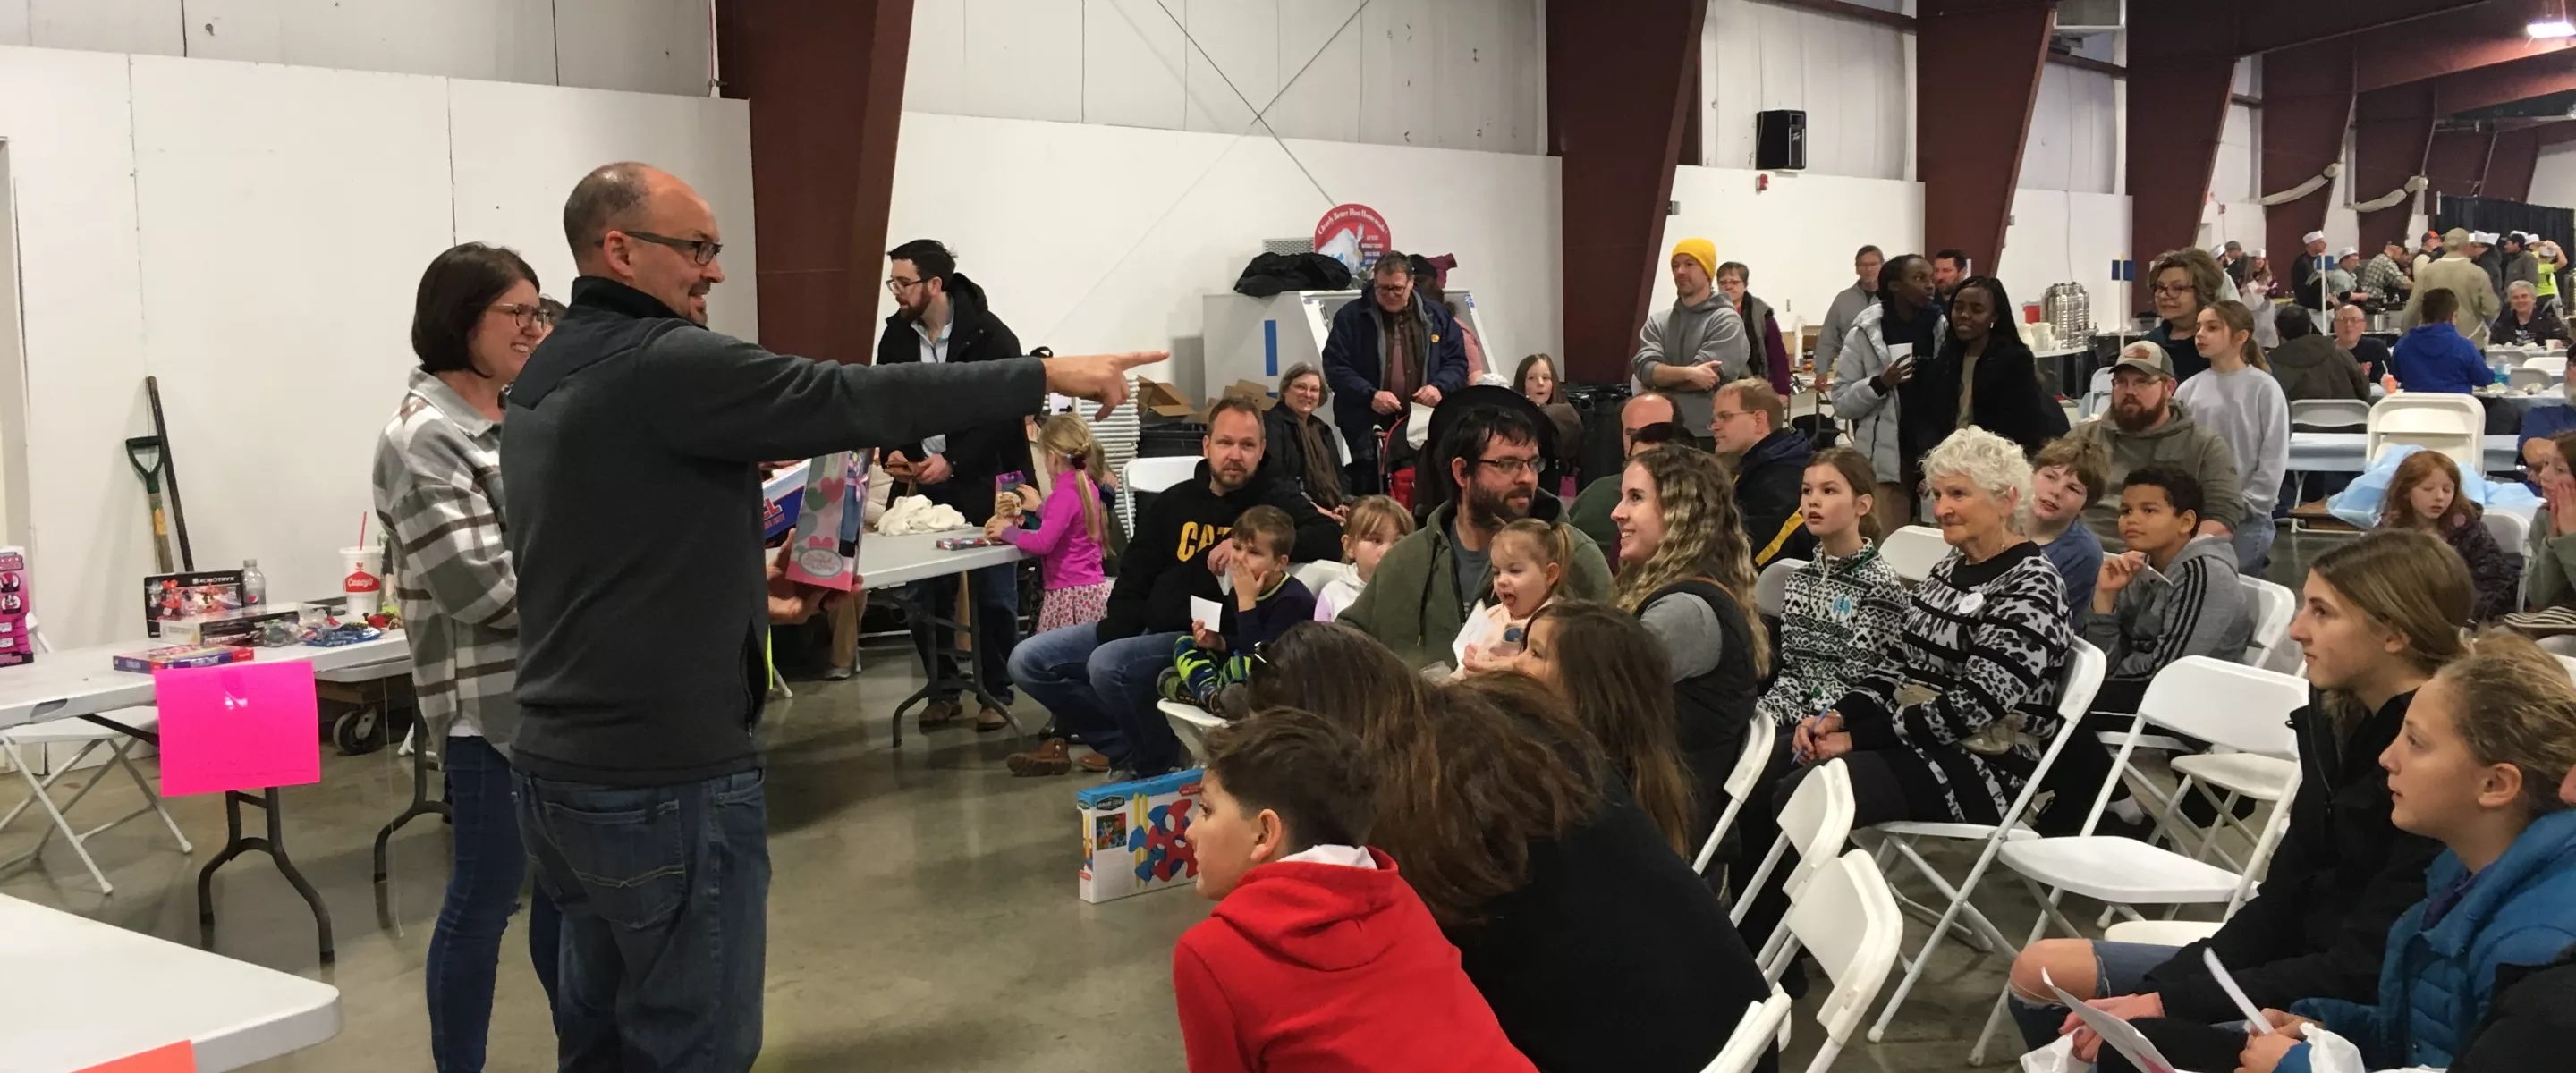 auctioneer pointing to crowd of children at toy auction